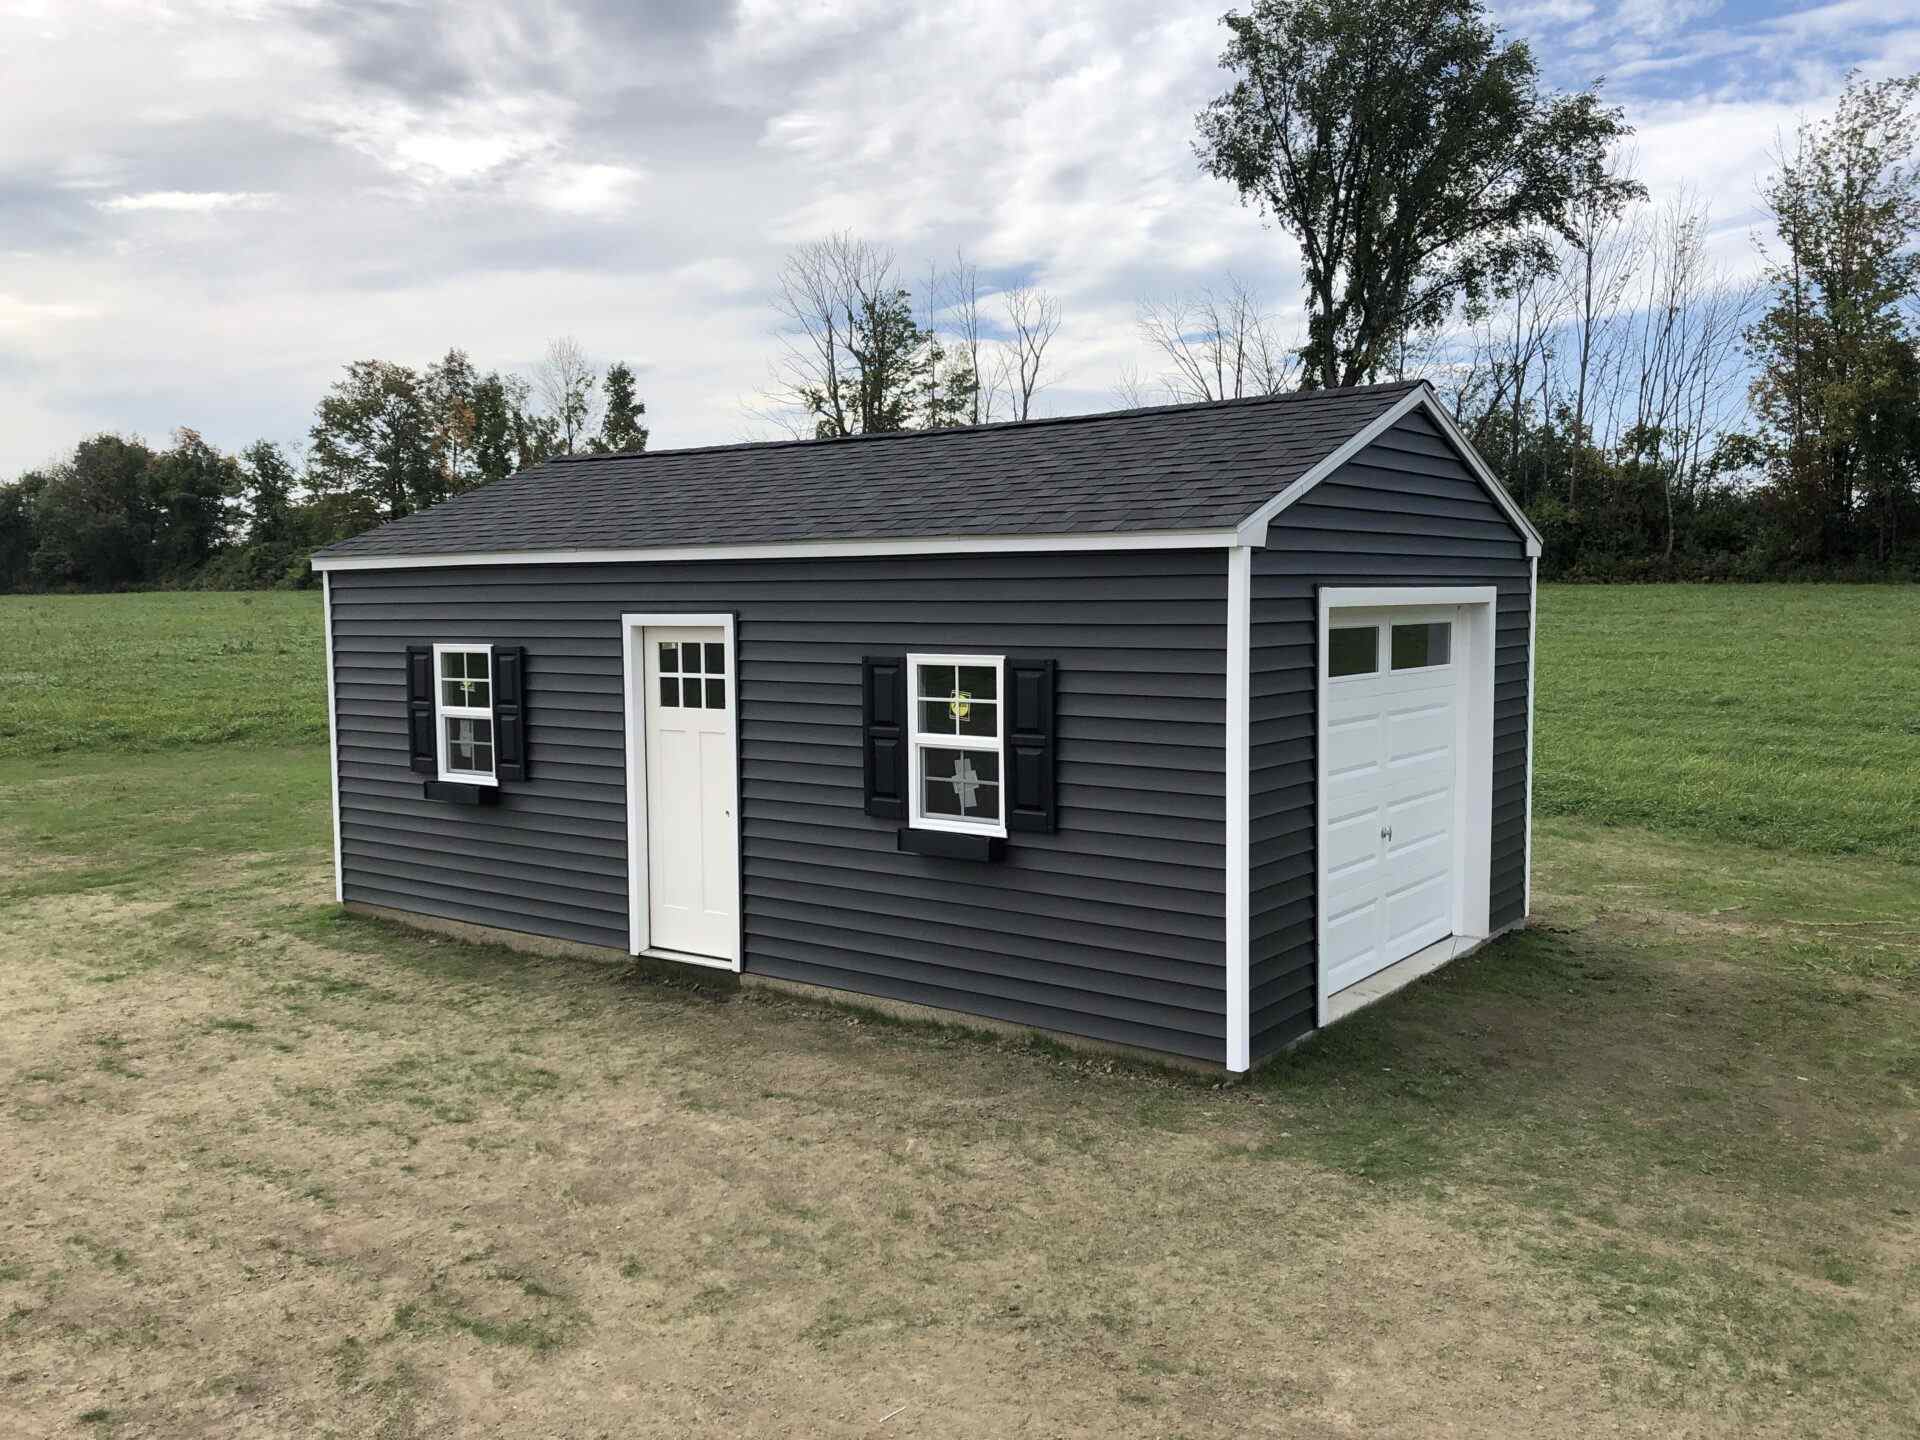 A shed with two windows and a door.